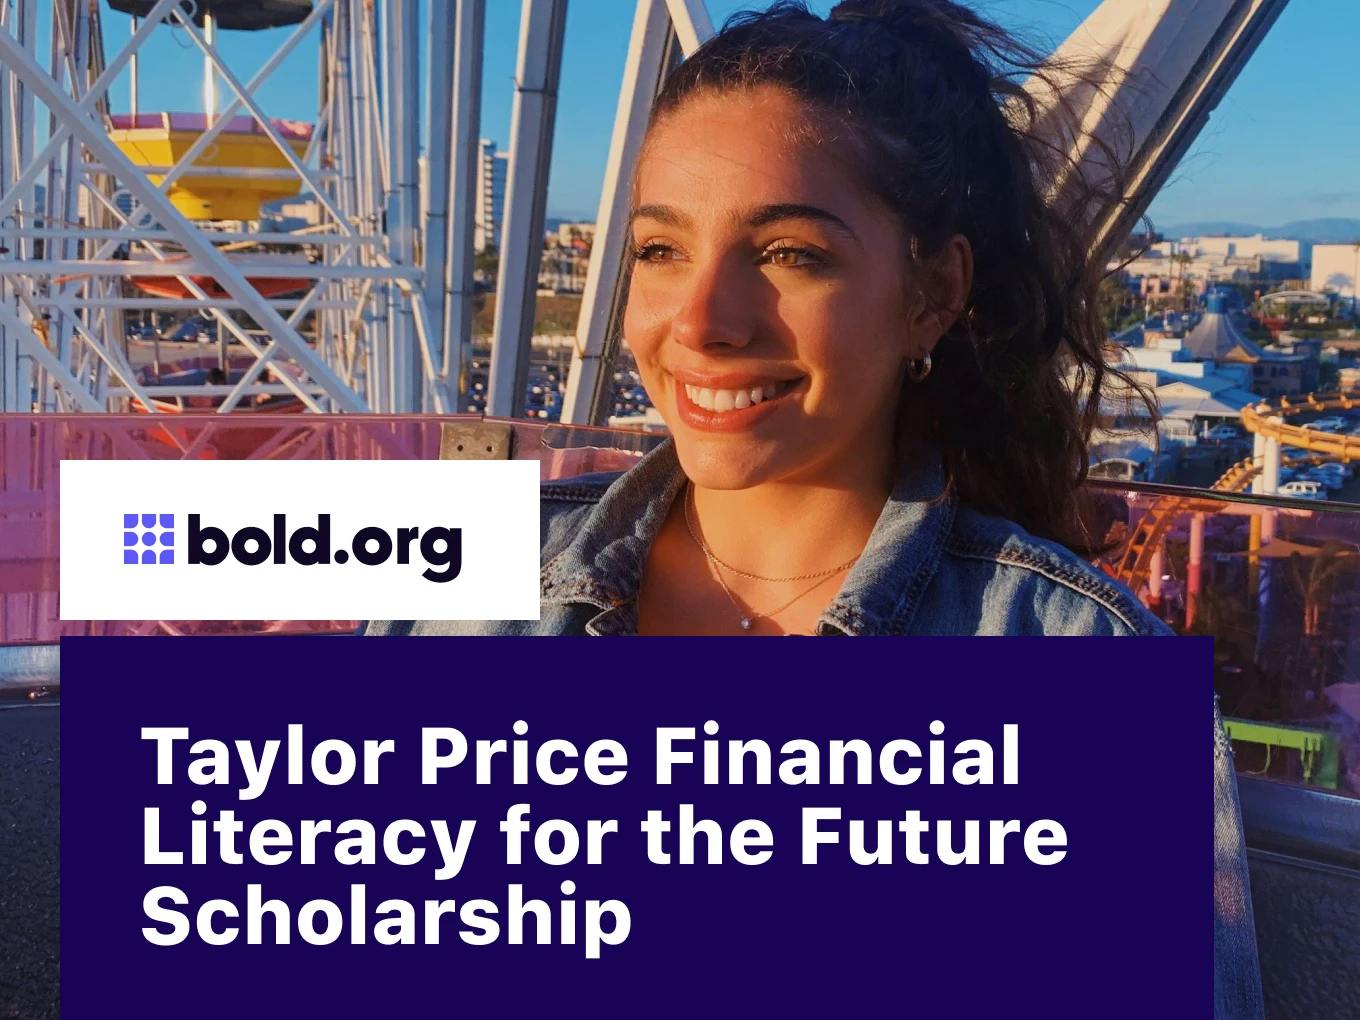 Taylor Price Financial Literacy for the Future Scholarship